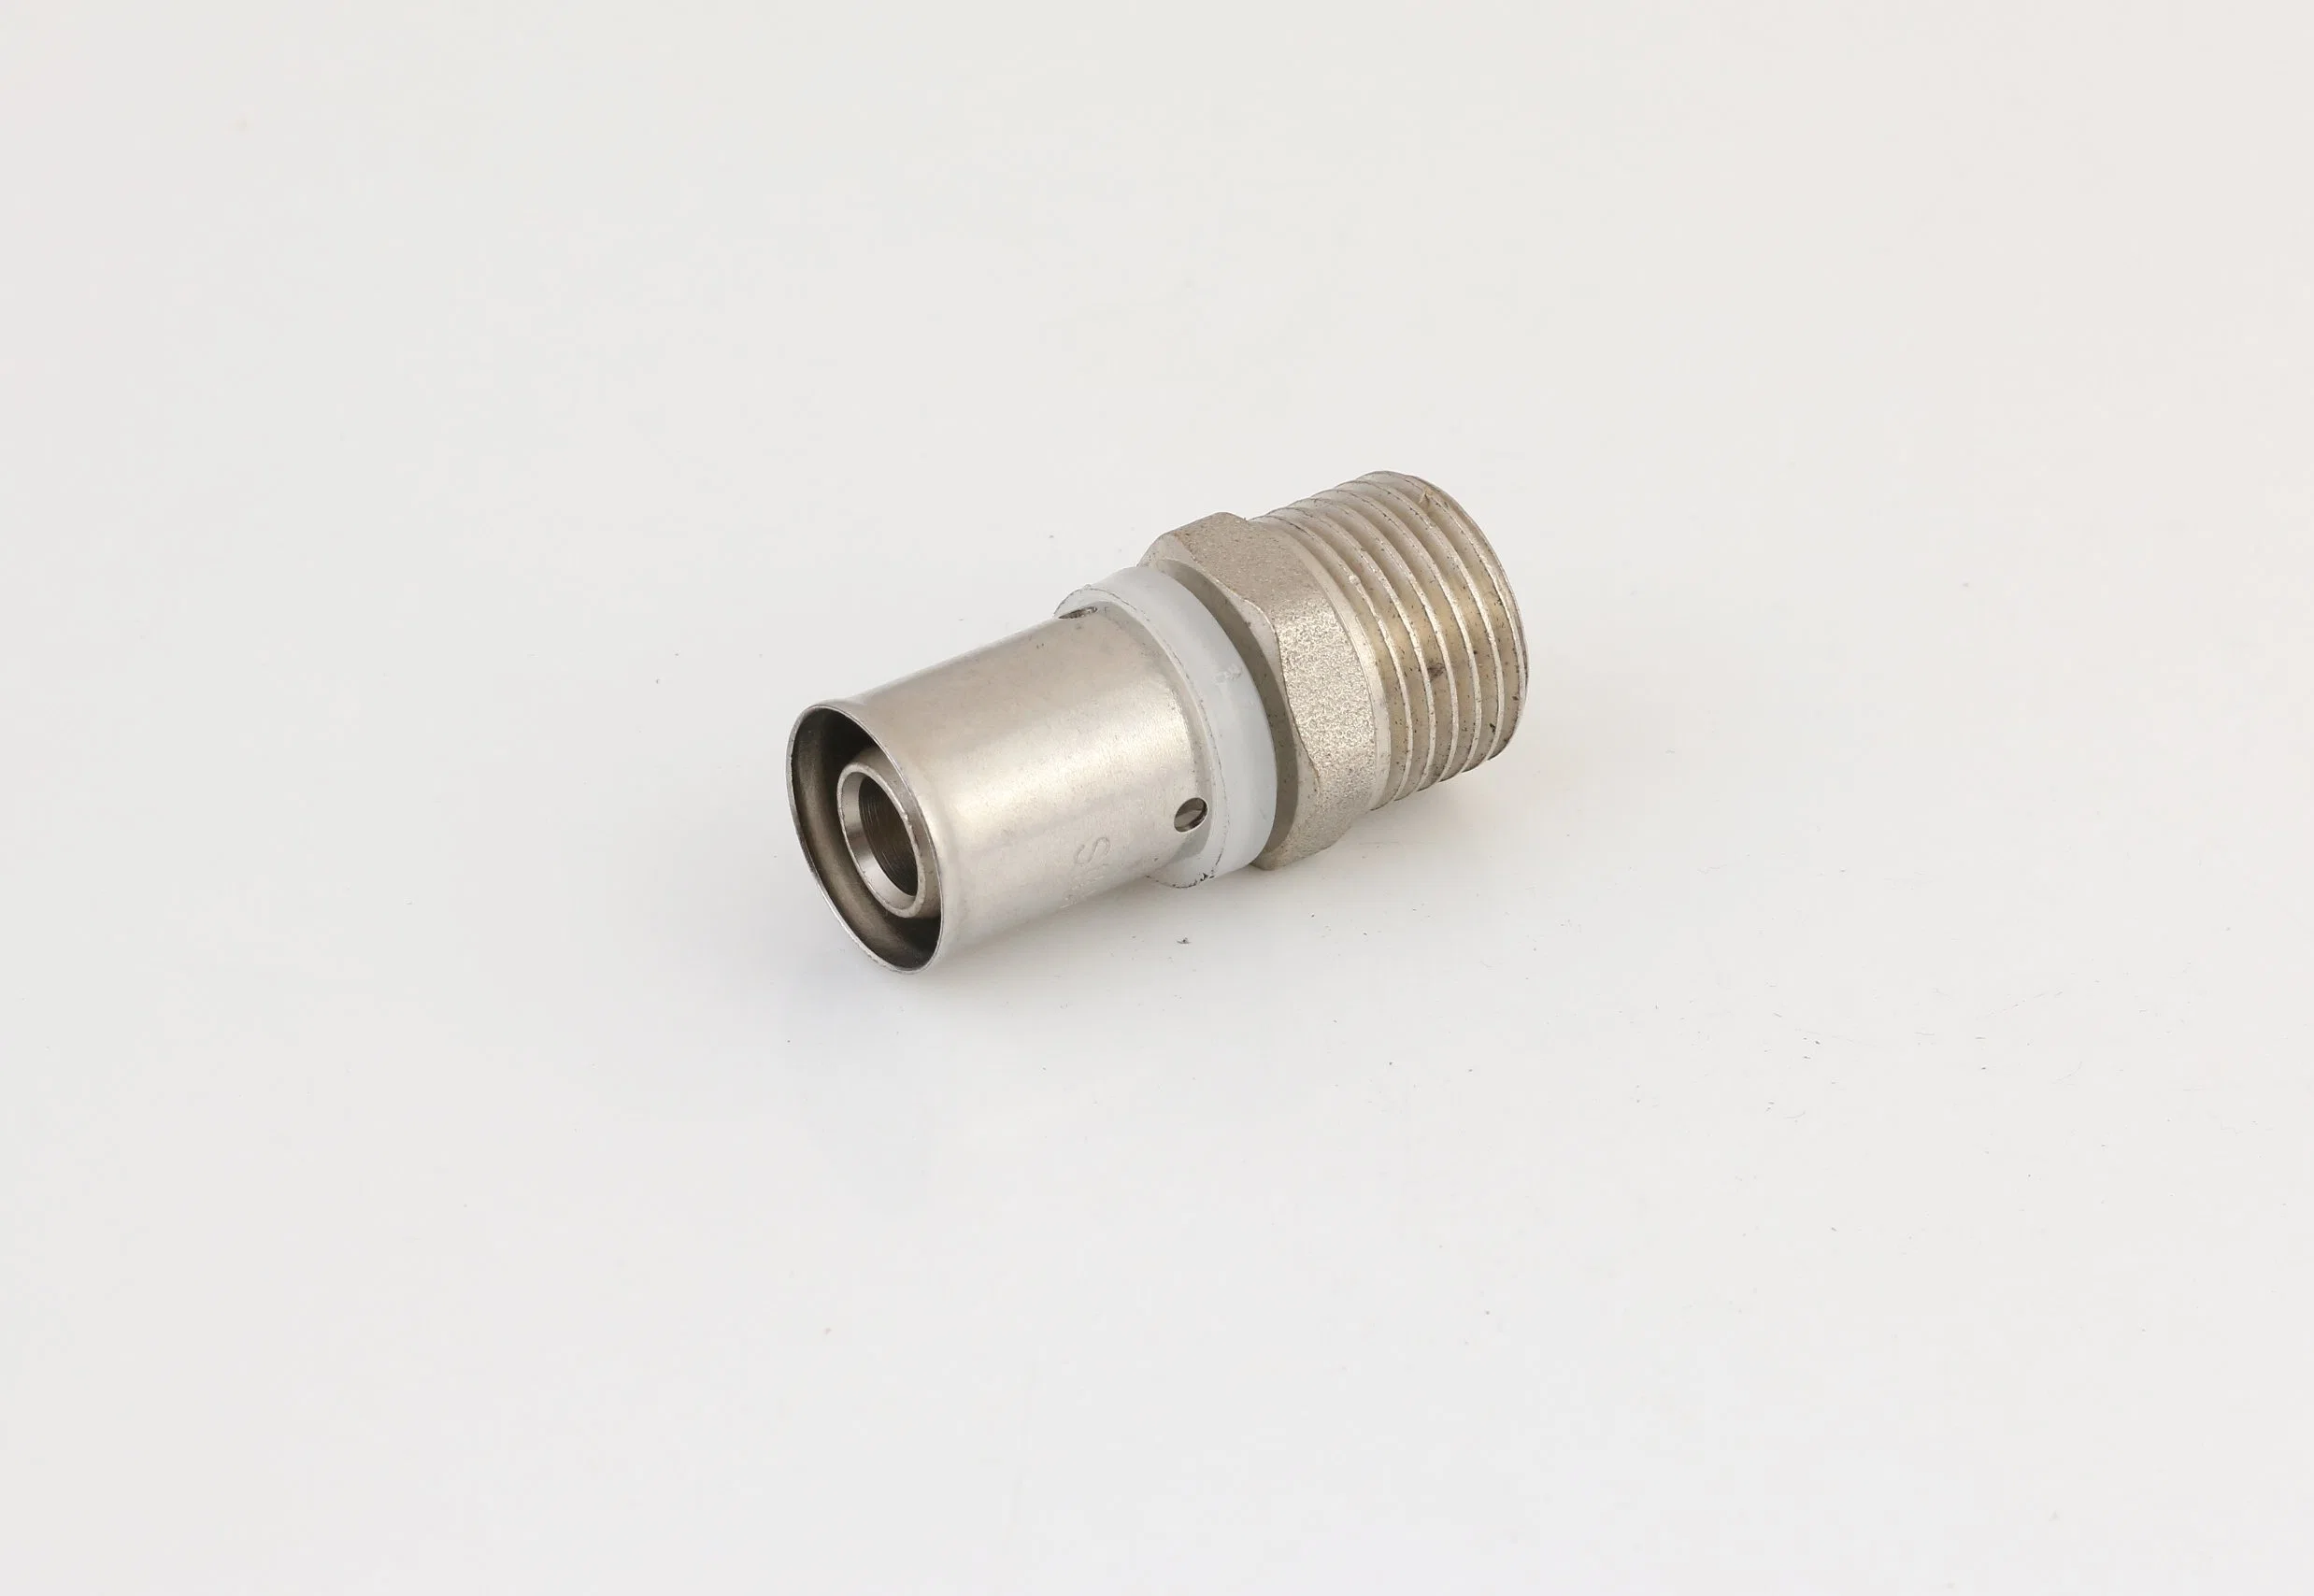 Brass Press Fitting Male Threads Coupling Connector for Plumbing Pex Water Line